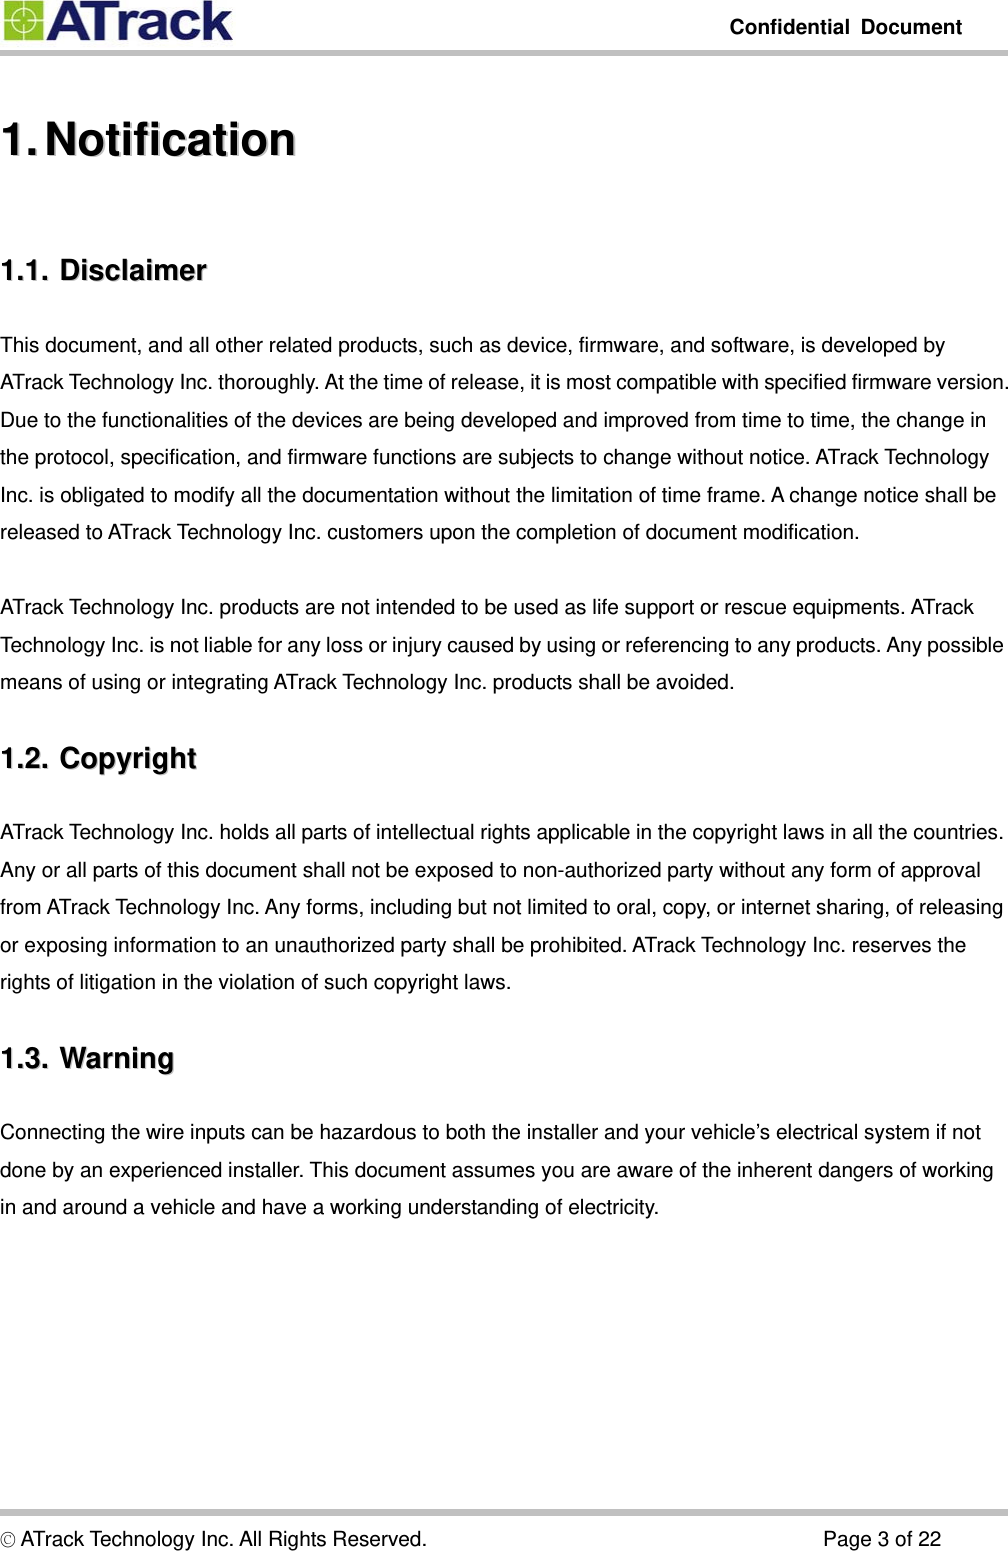         Confidential Document  © ATrack Technology Inc. All Rights Reserved.                                      Page 3 of 22 11..  NNoottiiffiiccaattiioonn  11..11..  DDiissccllaaiimmeerr  This document, and all other related products, such as device, firmware, and software, is developed by ATrack Technology Inc. thoroughly. At the time of release, it is most compatible with specified firmware version. Due to the functionalities of the devices are being developed and improved from time to time, the change in the protocol, specification, and firmware functions are subjects to change without notice. ATrack Technology Inc. is obligated to modify all the documentation without the limitation of time frame. A change notice shall be released to ATrack Technology Inc. customers upon the completion of document modification.  ATrack Technology Inc. products are not intended to be used as life support or rescue equipments. ATrack Technology Inc. is not liable for any loss or injury caused by using or referencing to any products. Any possible means of using or integrating ATrack Technology Inc. products shall be avoided. 11..22..  CCooppyyrriigghhtt  ATrack Technology Inc. holds all parts of intellectual rights applicable in the copyright laws in all the countries. Any or all parts of this document shall not be exposed to non-authorized party without any form of approval from ATrack Technology Inc. Any forms, including but not limited to oral, copy, or internet sharing, of releasing or exposing information to an unauthorized party shall be prohibited. ATrack Technology Inc. reserves the rights of litigation in the violation of such copyright laws. 11..33..  WWaarrnniinngg  Connecting the wire inputs can be hazardous to both the installer and your vehicle’s electrical system if not done by an experienced installer. This document assumes you are aware of the inherent dangers of working in and around a vehicle and have a working understanding of electricity. 